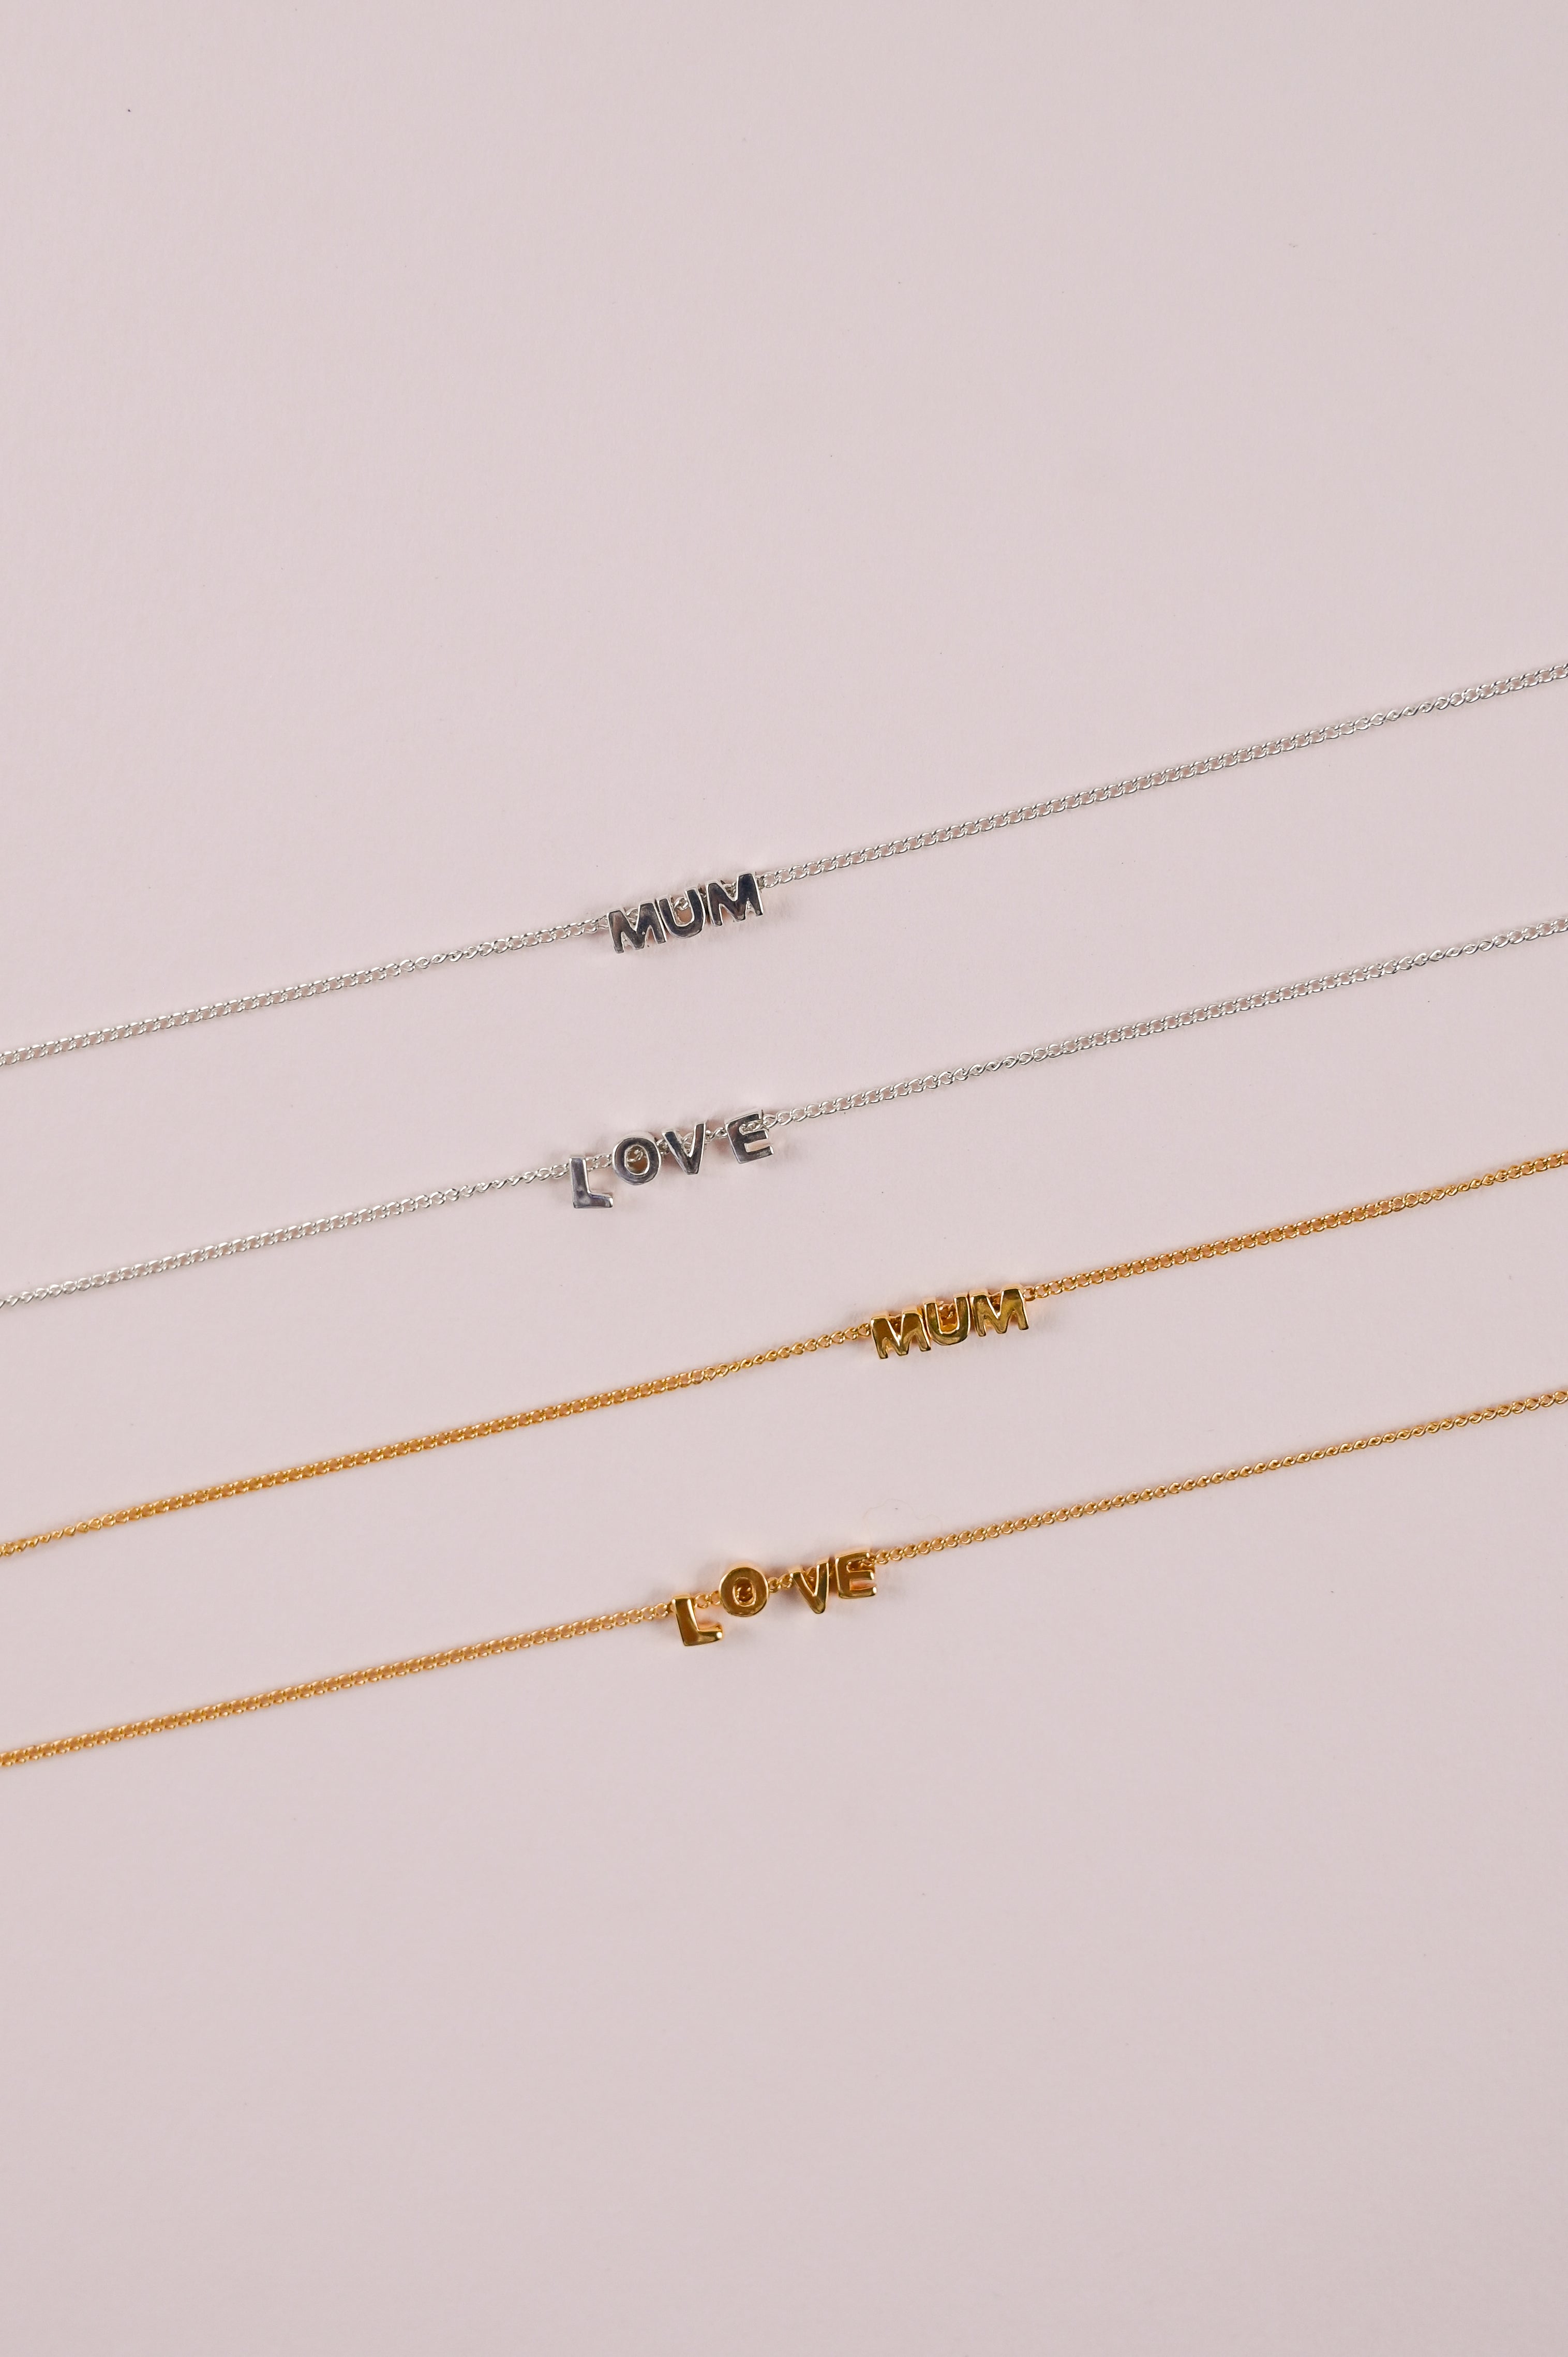 MUM Tiny Love Letter Necklace 18k gold plated